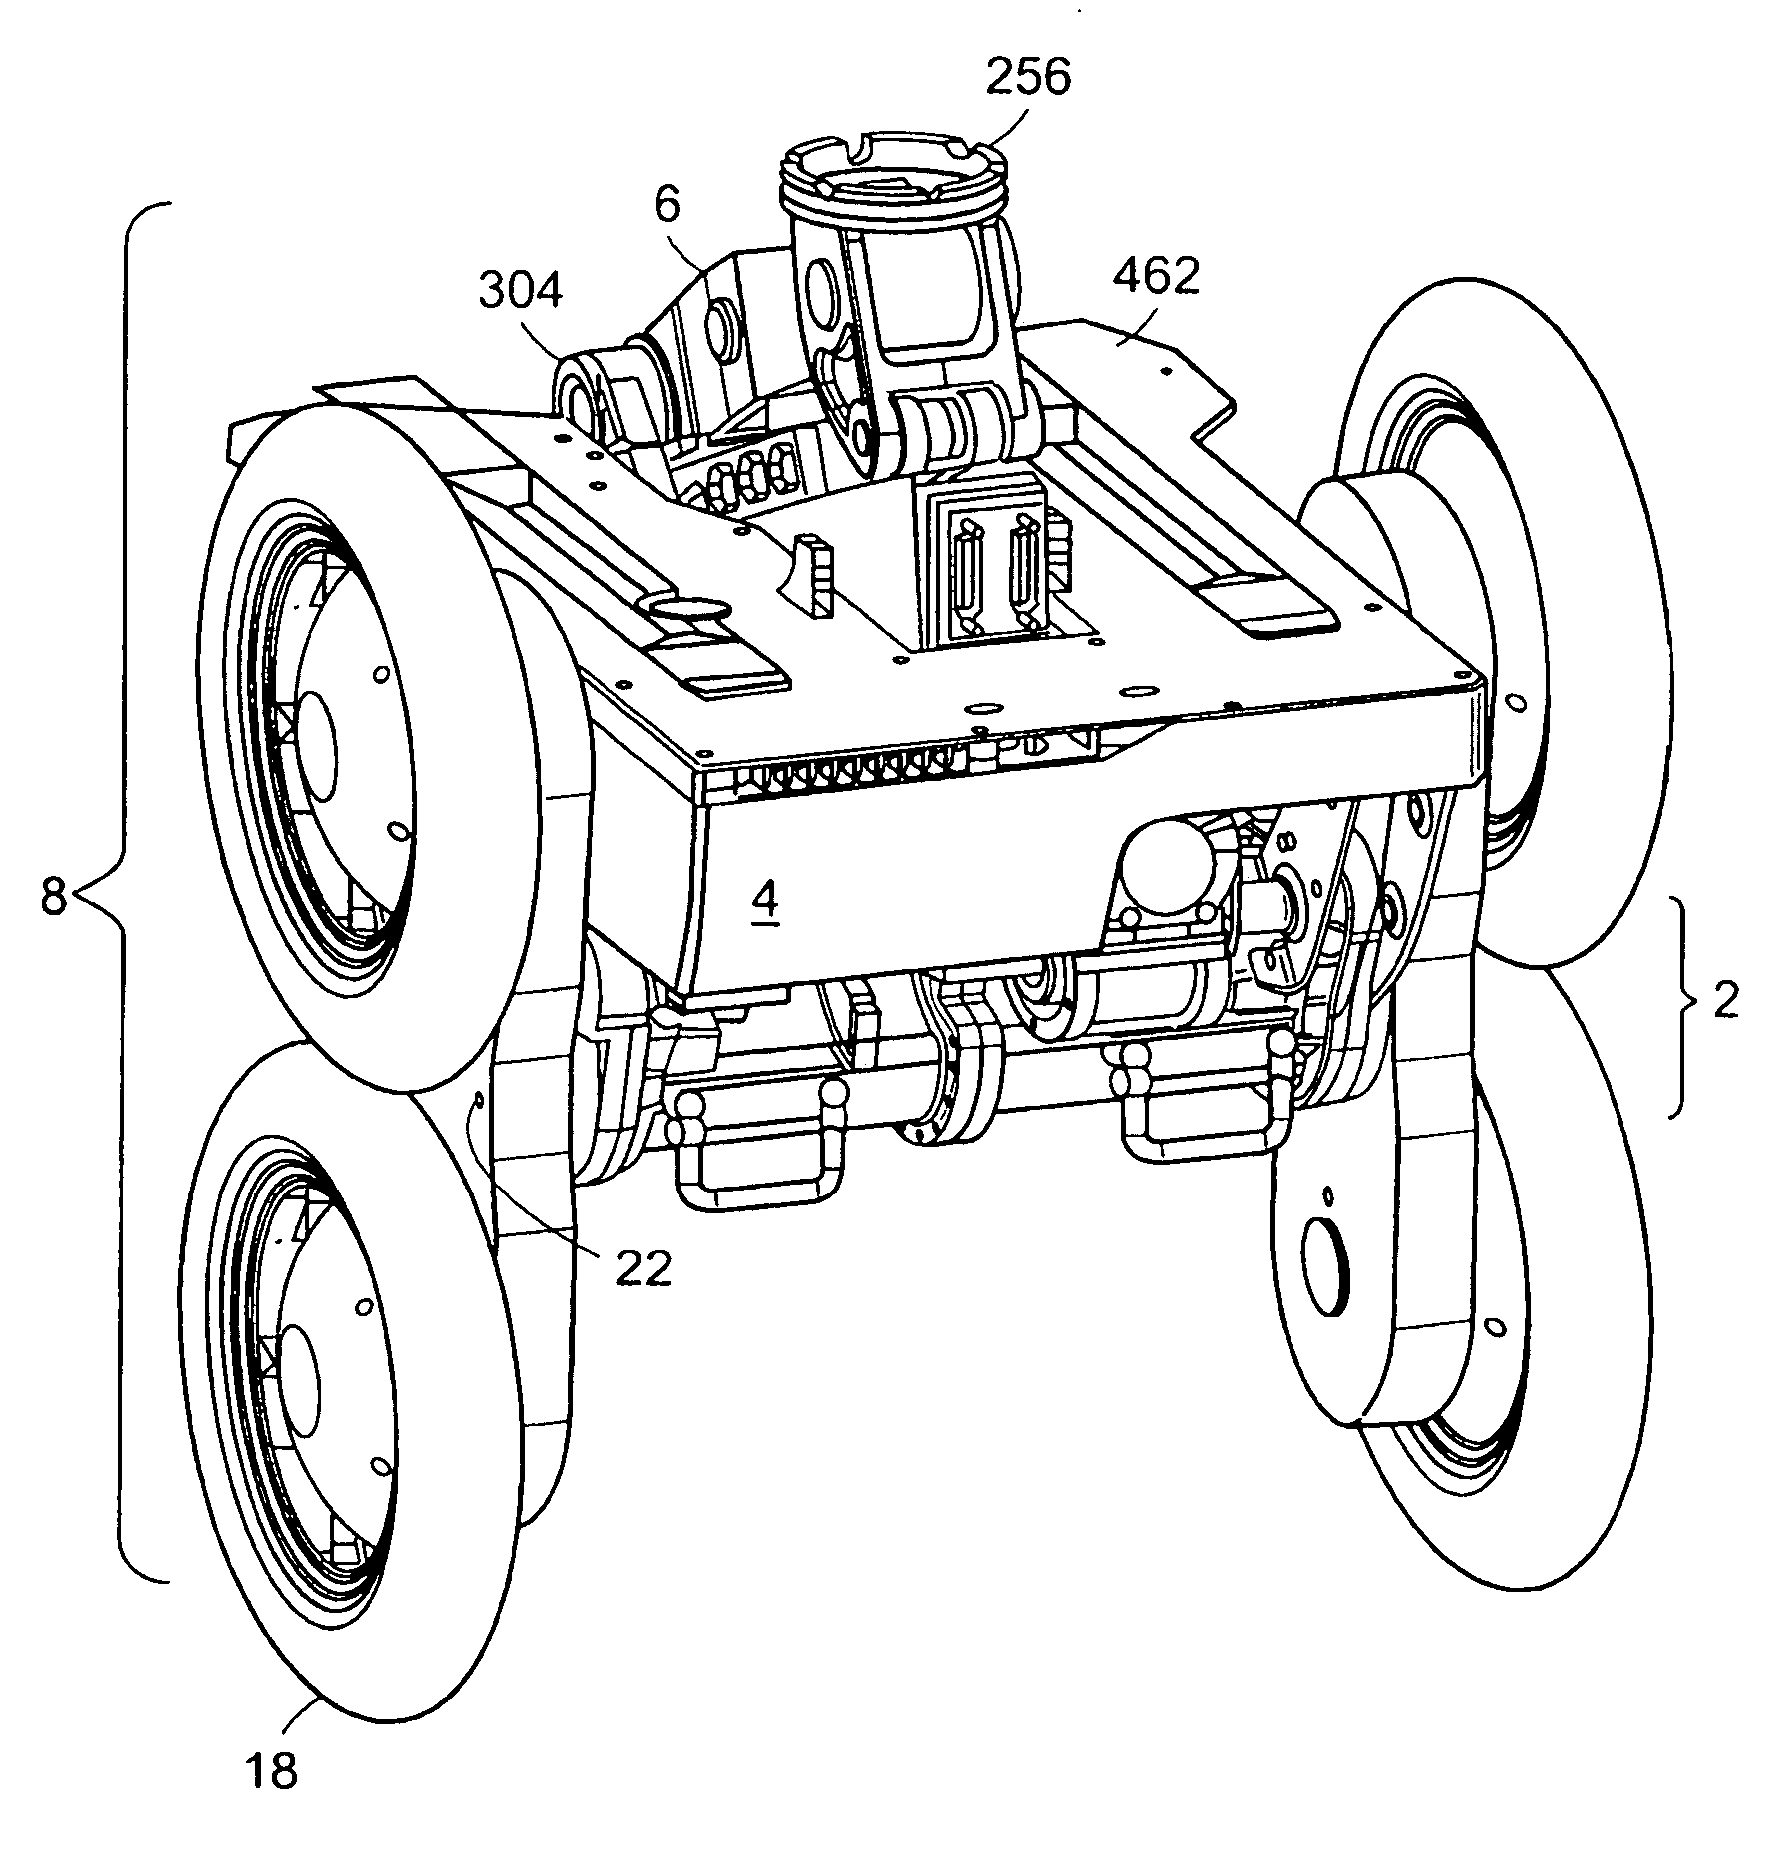 Mechanical improvements to a personal vehicle